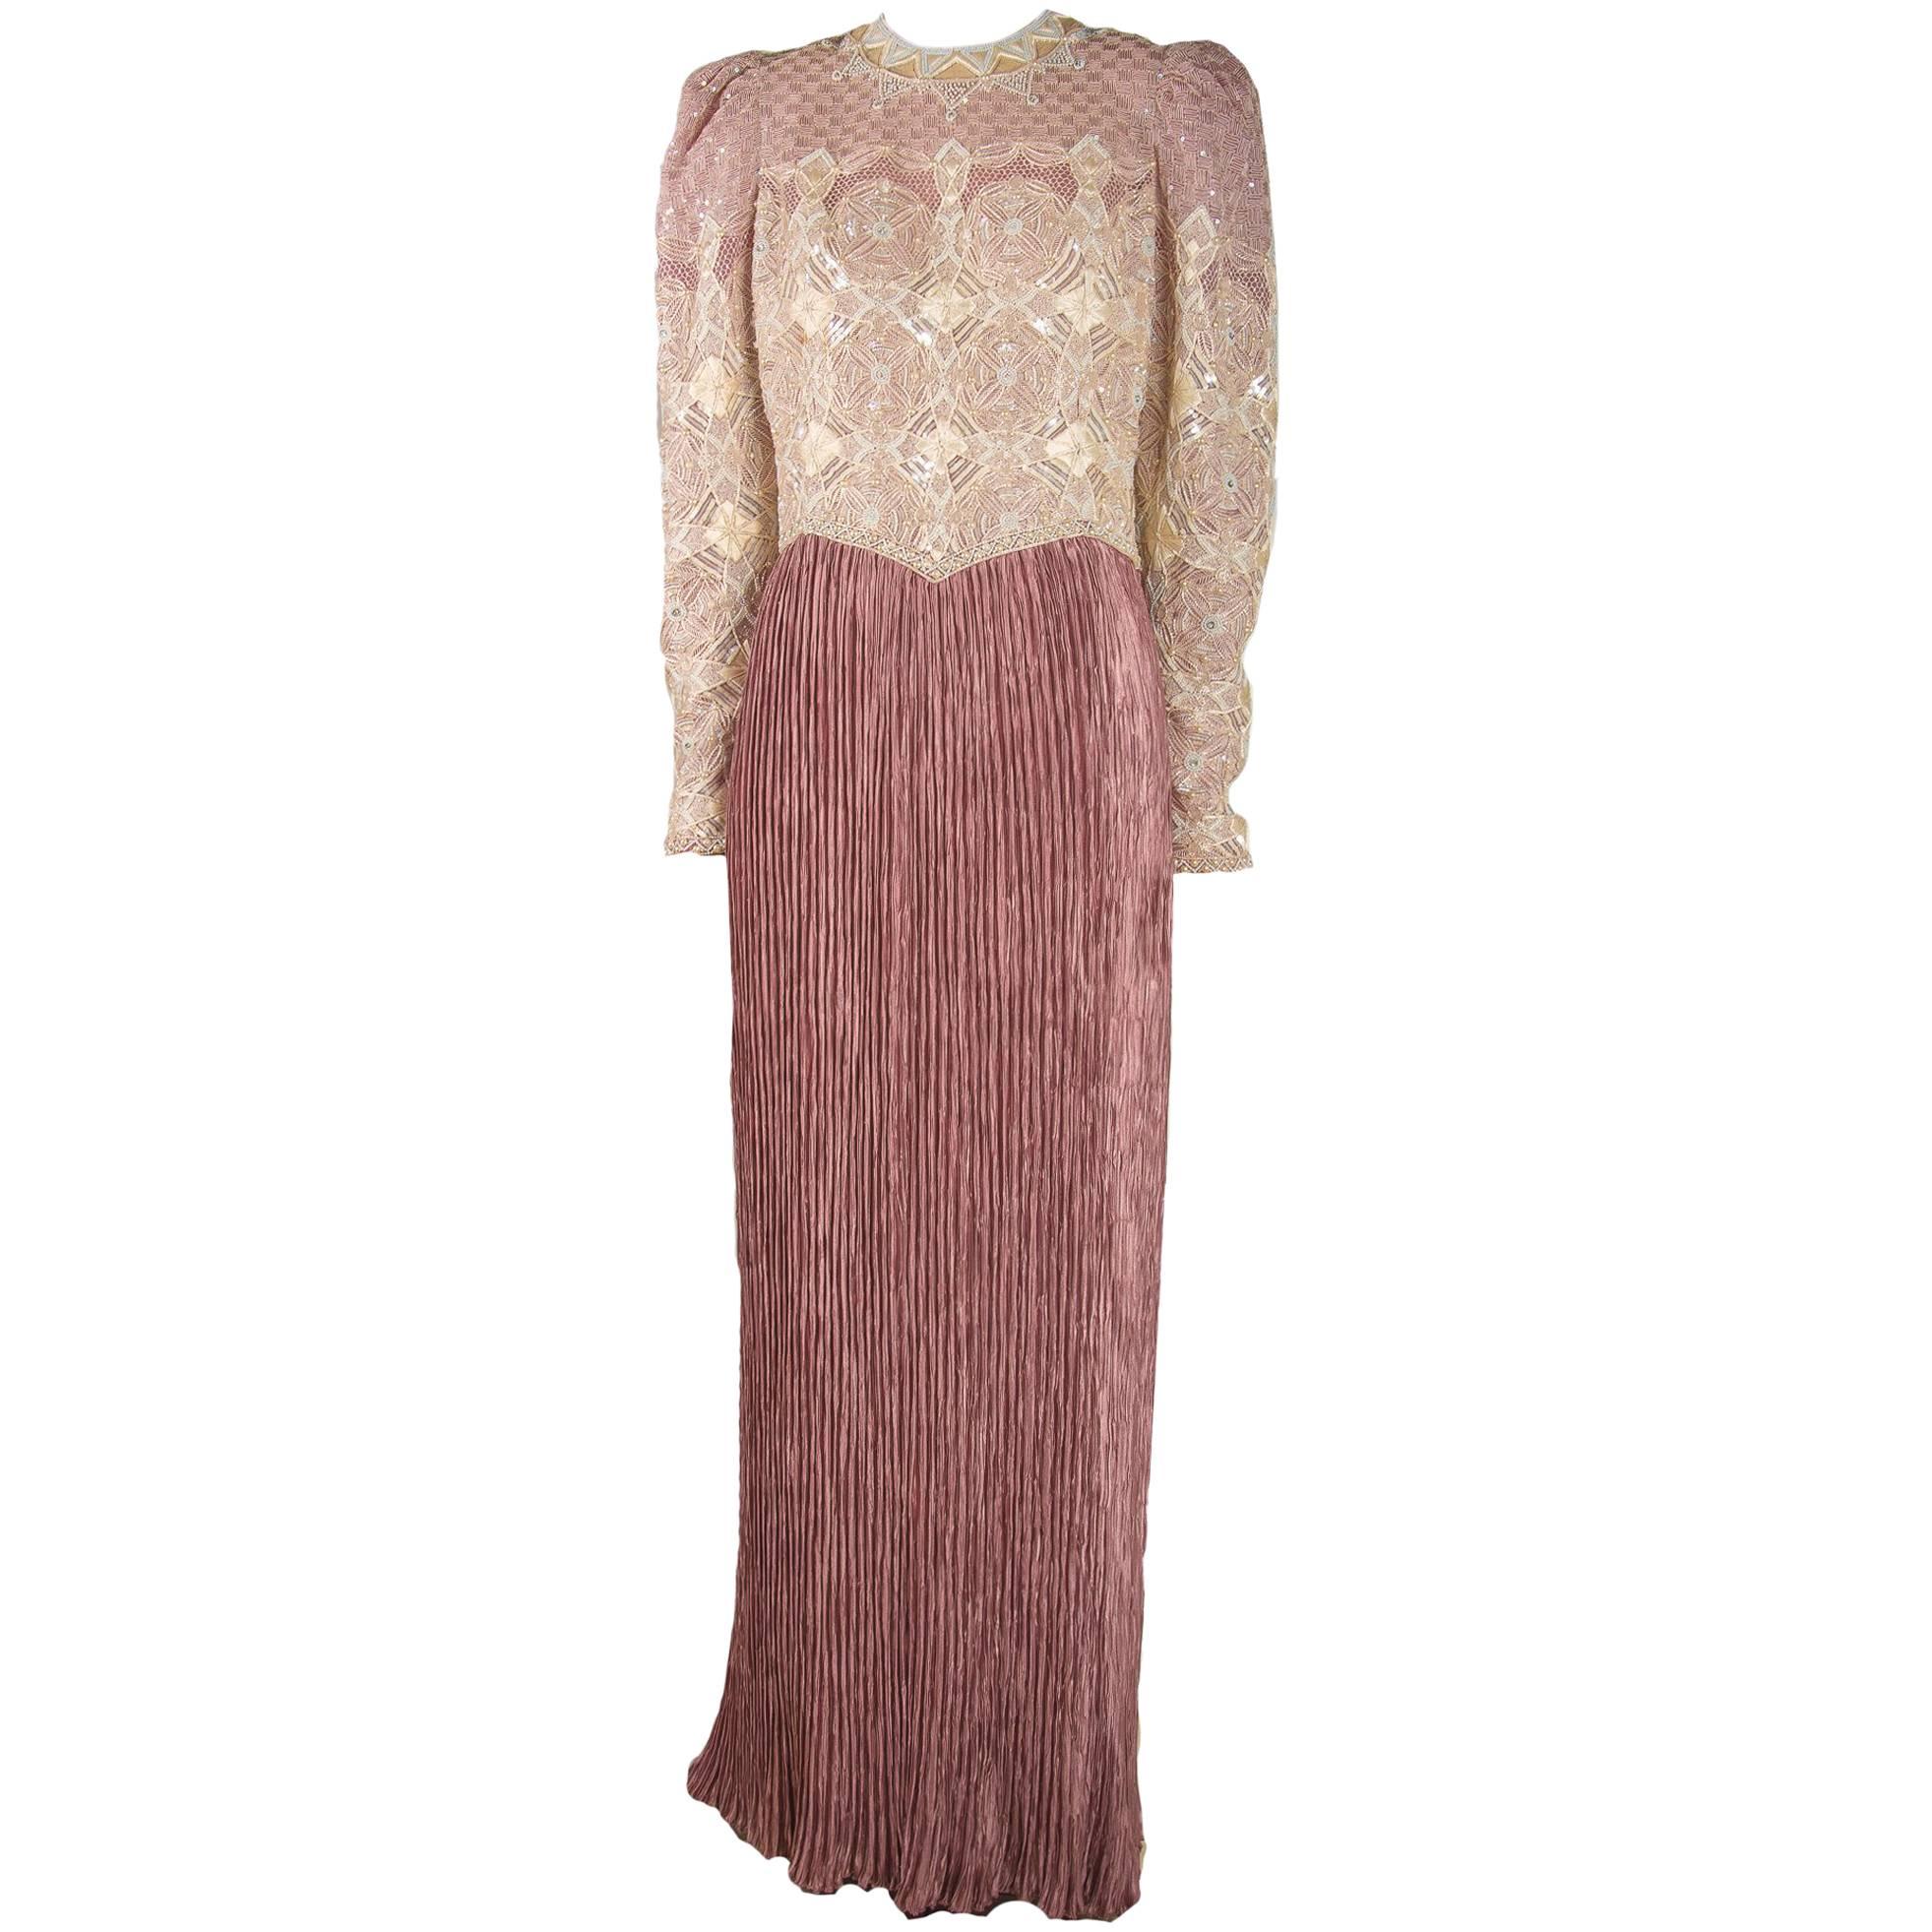 Mary McFadden Couture Evening Gown - Fortuny For Sale